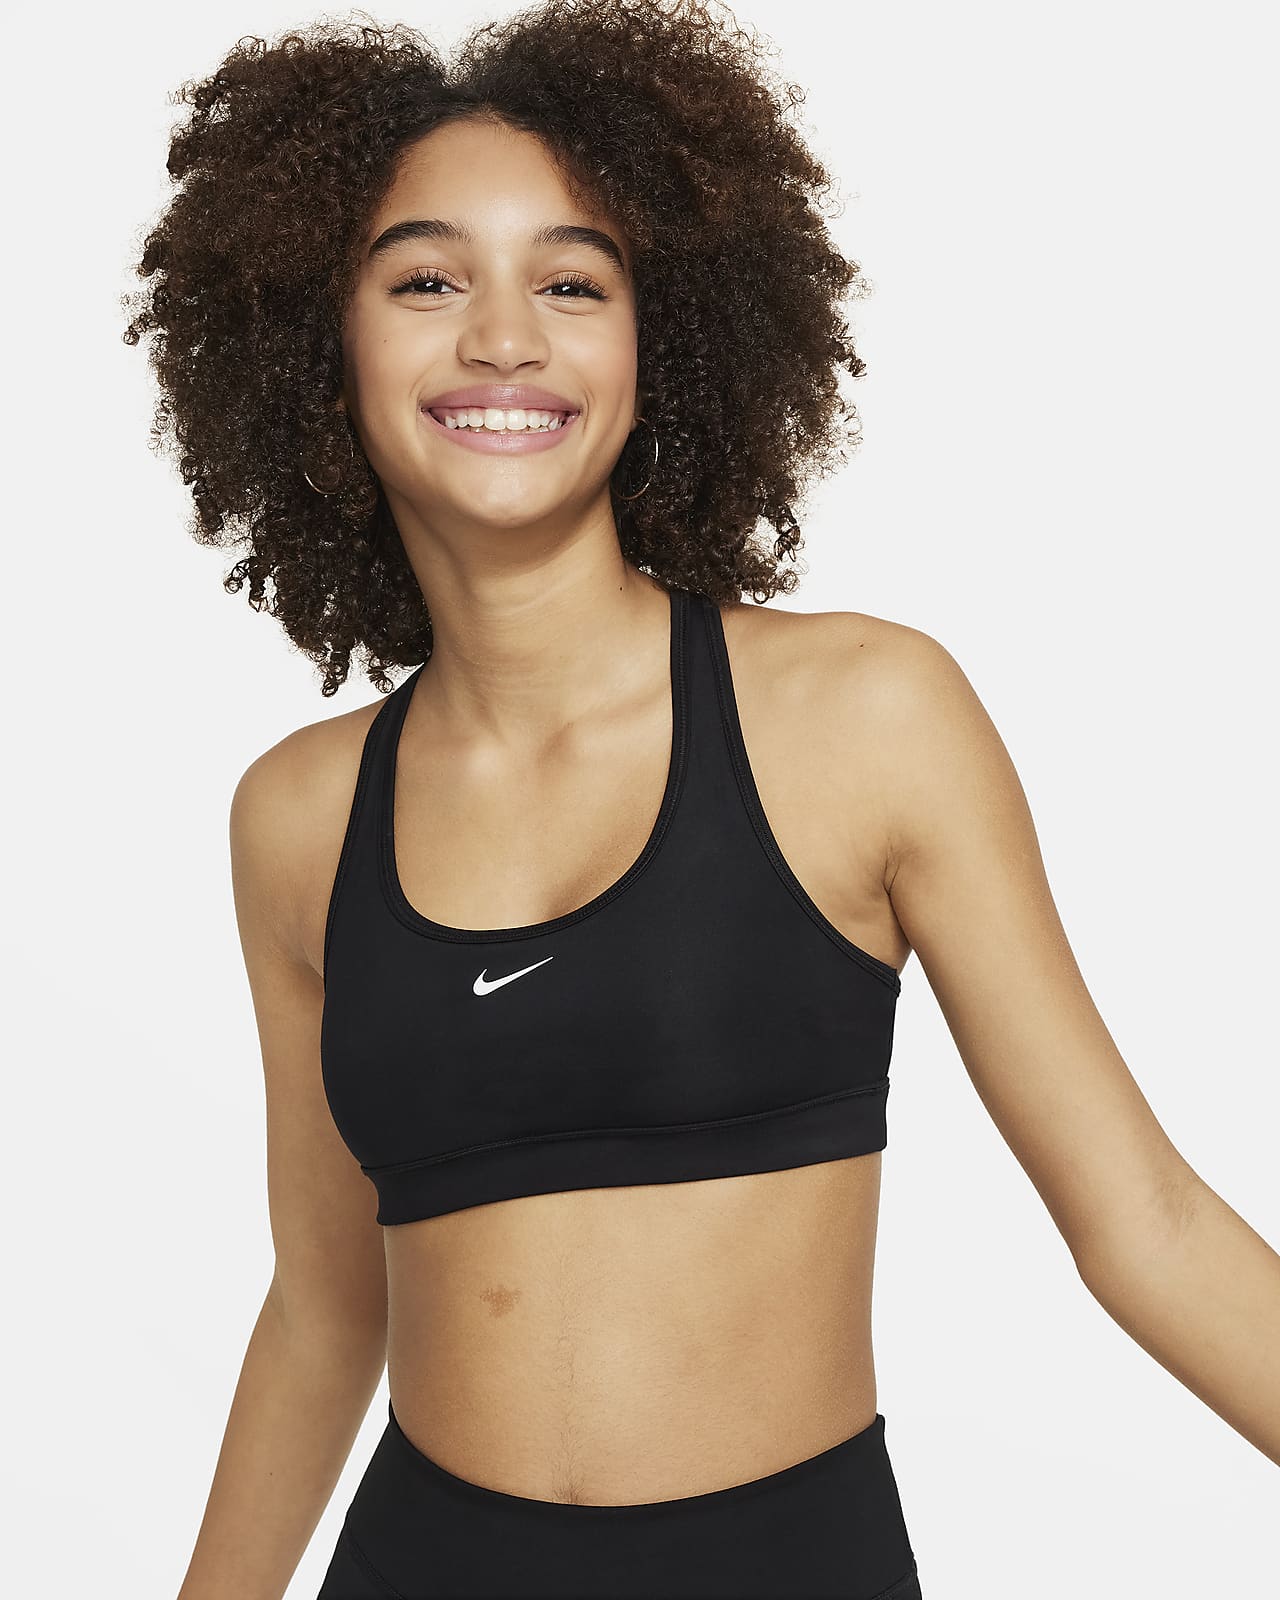 NIKE Dri-FIT Swoosh Sports Bra (DM0580-010, XL, Black, White) in Ahmedabad  at best price by Royal Choice - Justdial